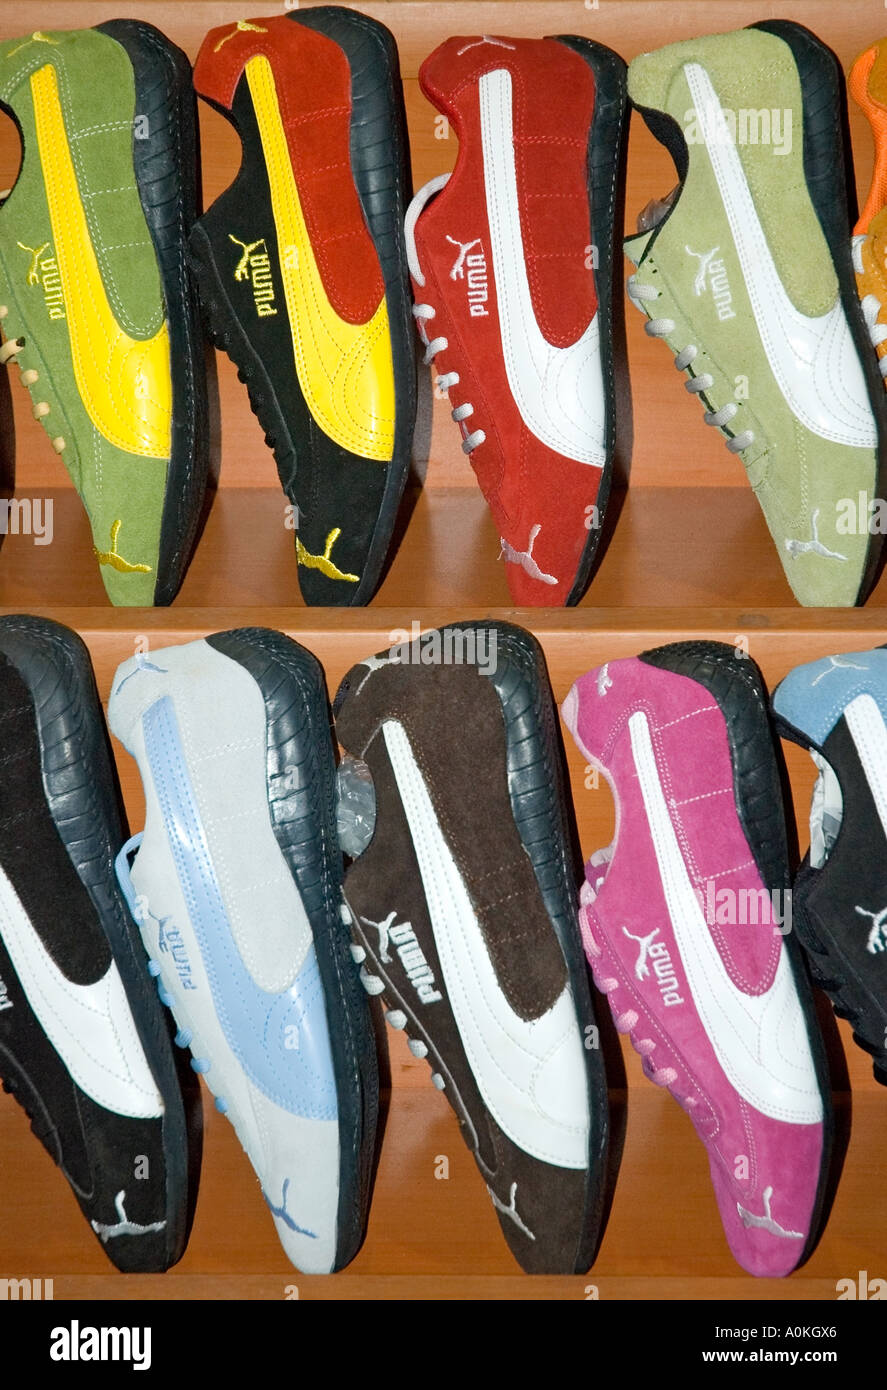 Sneakers are seen on a running shoe display inside the Puma SE